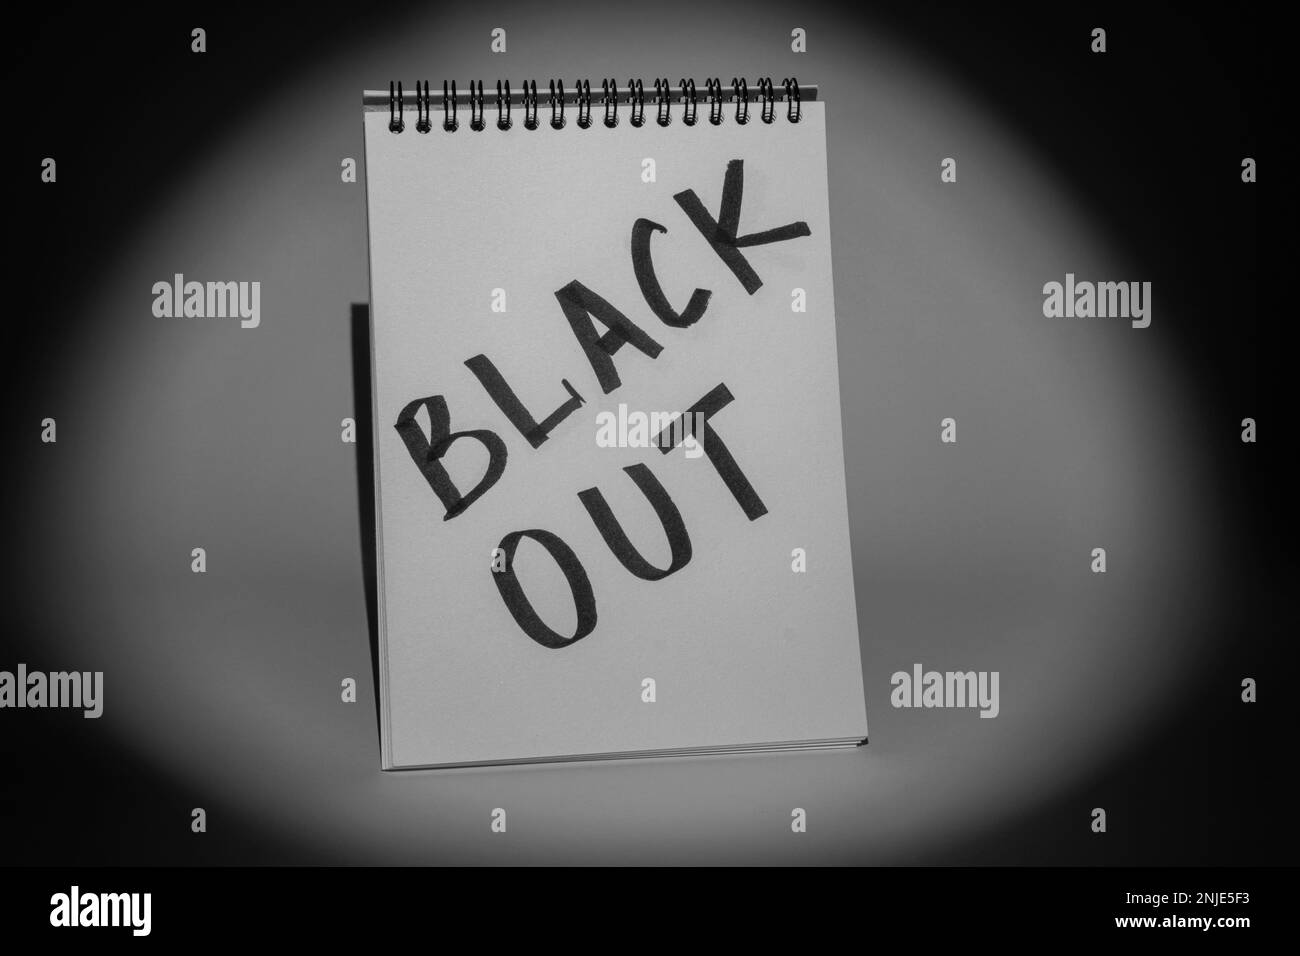 Notepad with the inscription 'Blackout' on a gray background, illuminated by a spotlight. Monochrome picture. Power outage concept Stock Photo